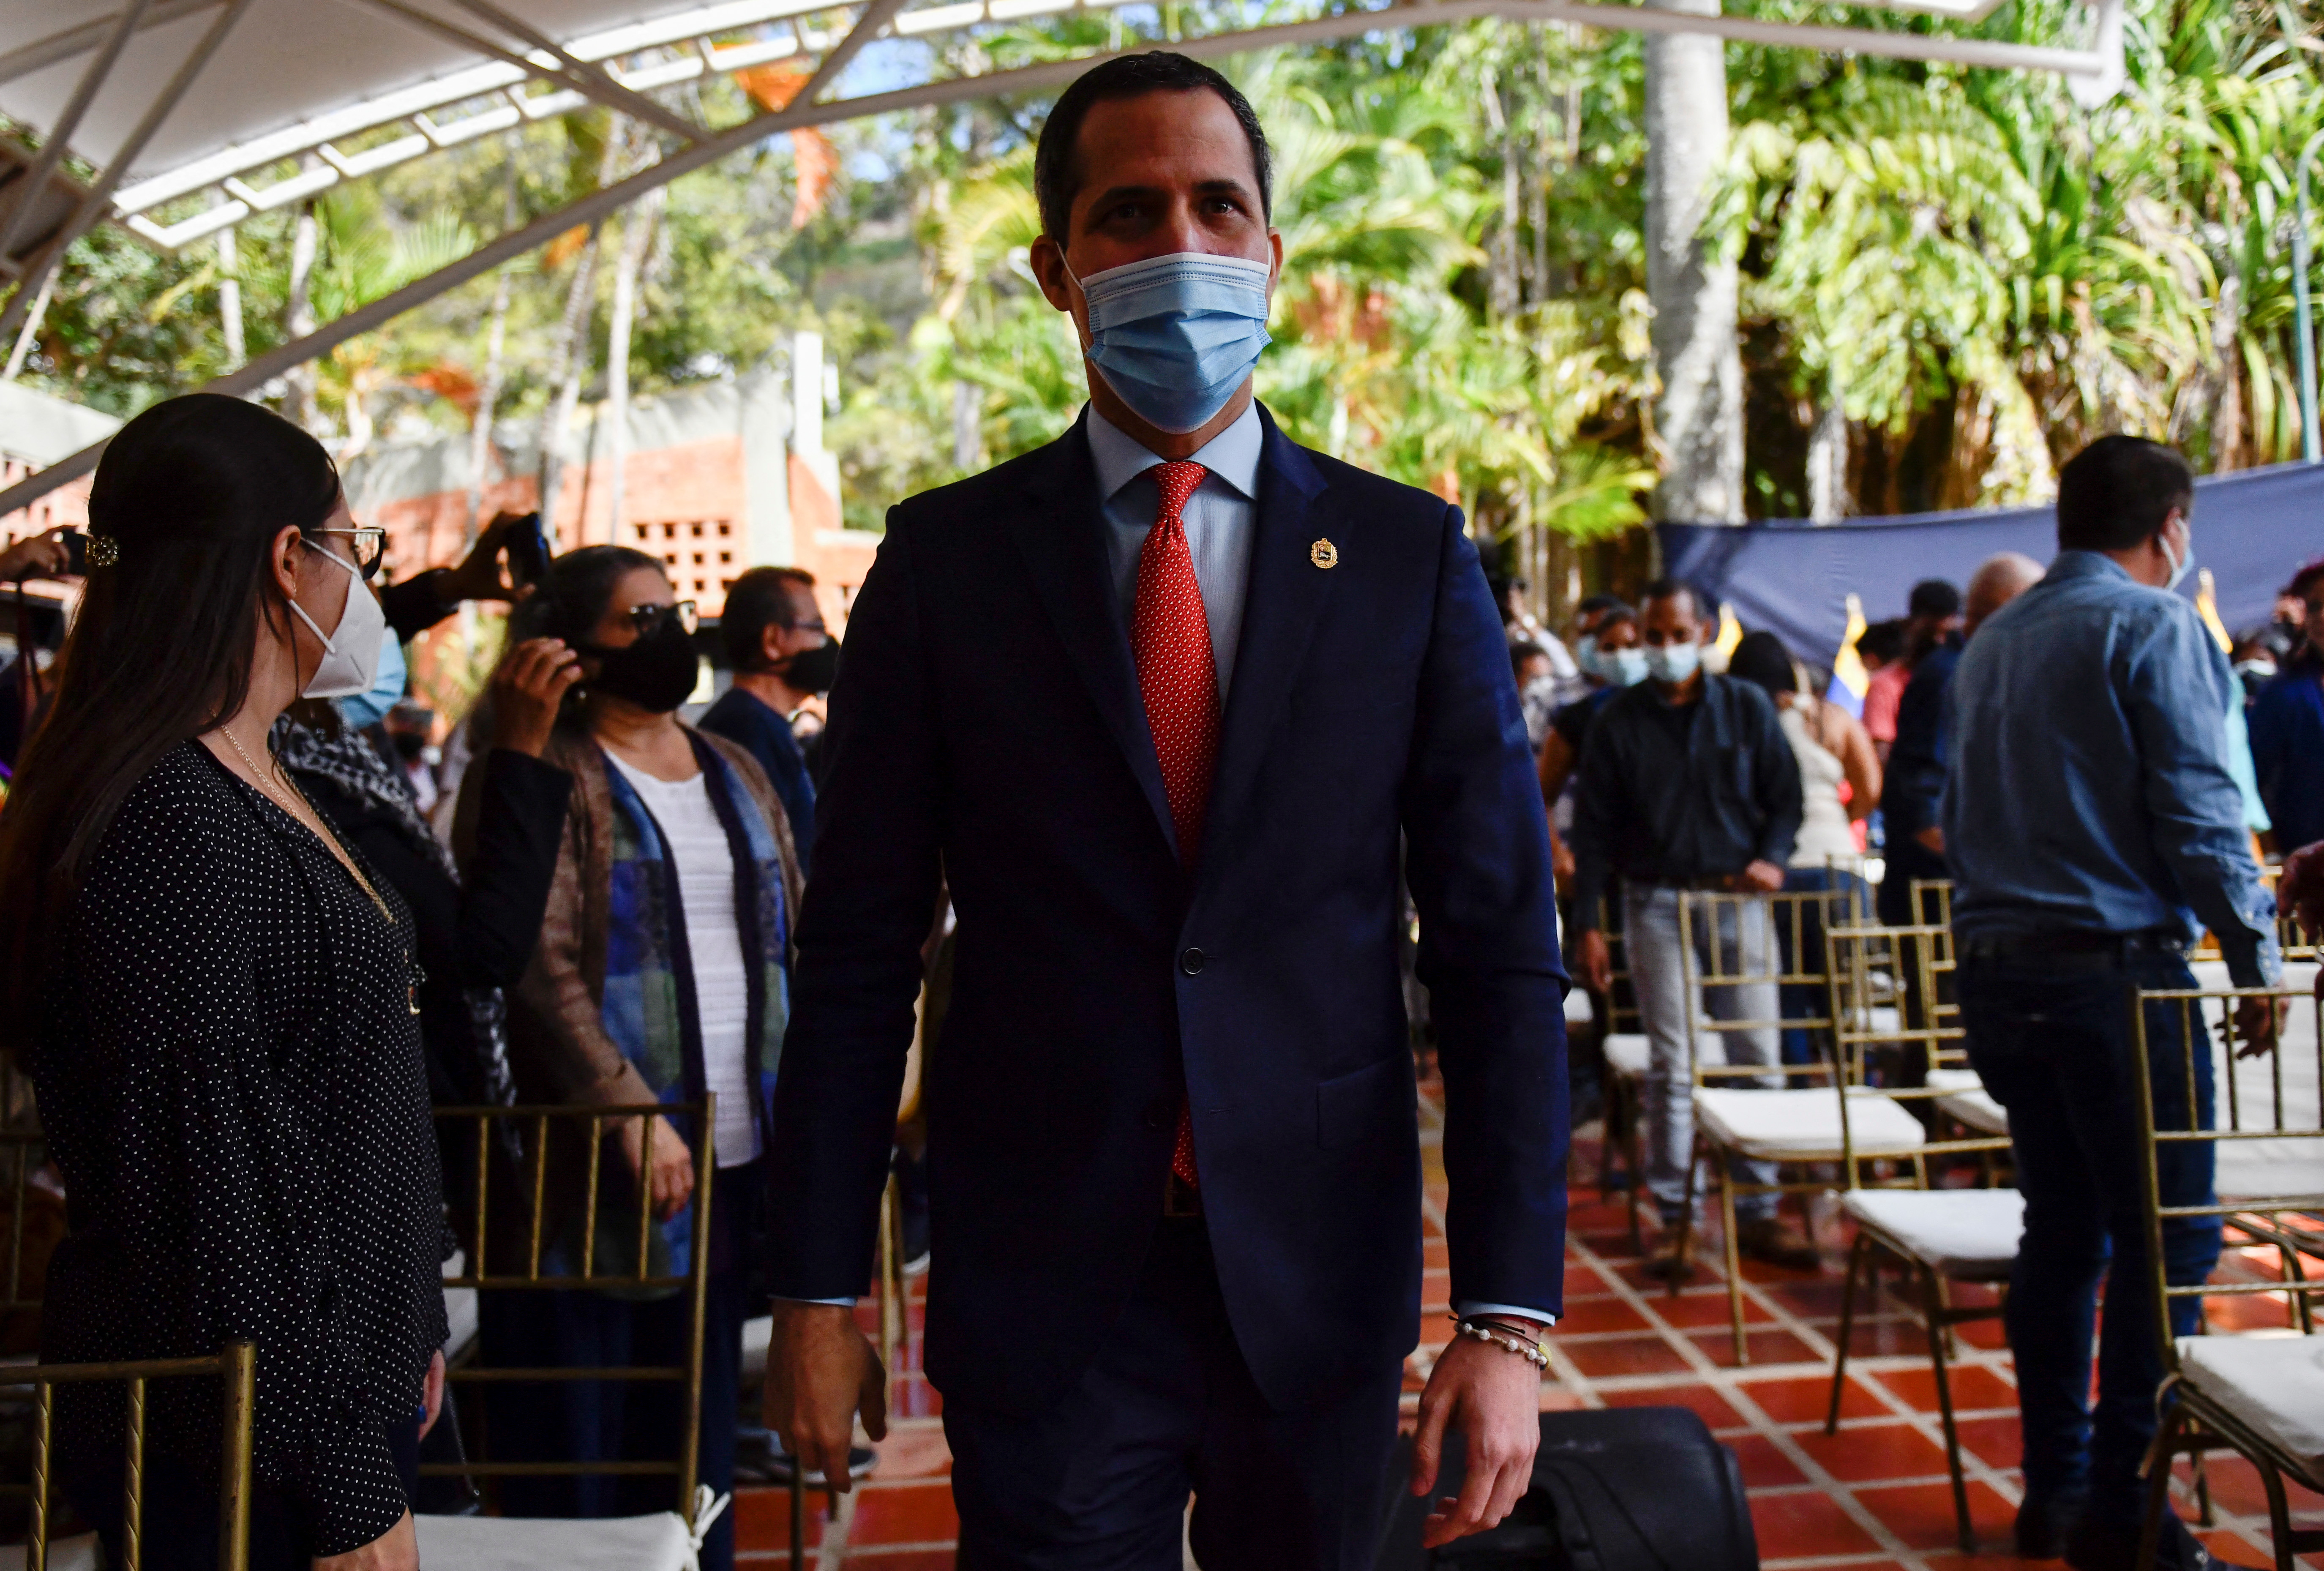 Venezuela's opposition leader Juan Guaido arrives to attend a session of the opposition's national assembly in Caracas